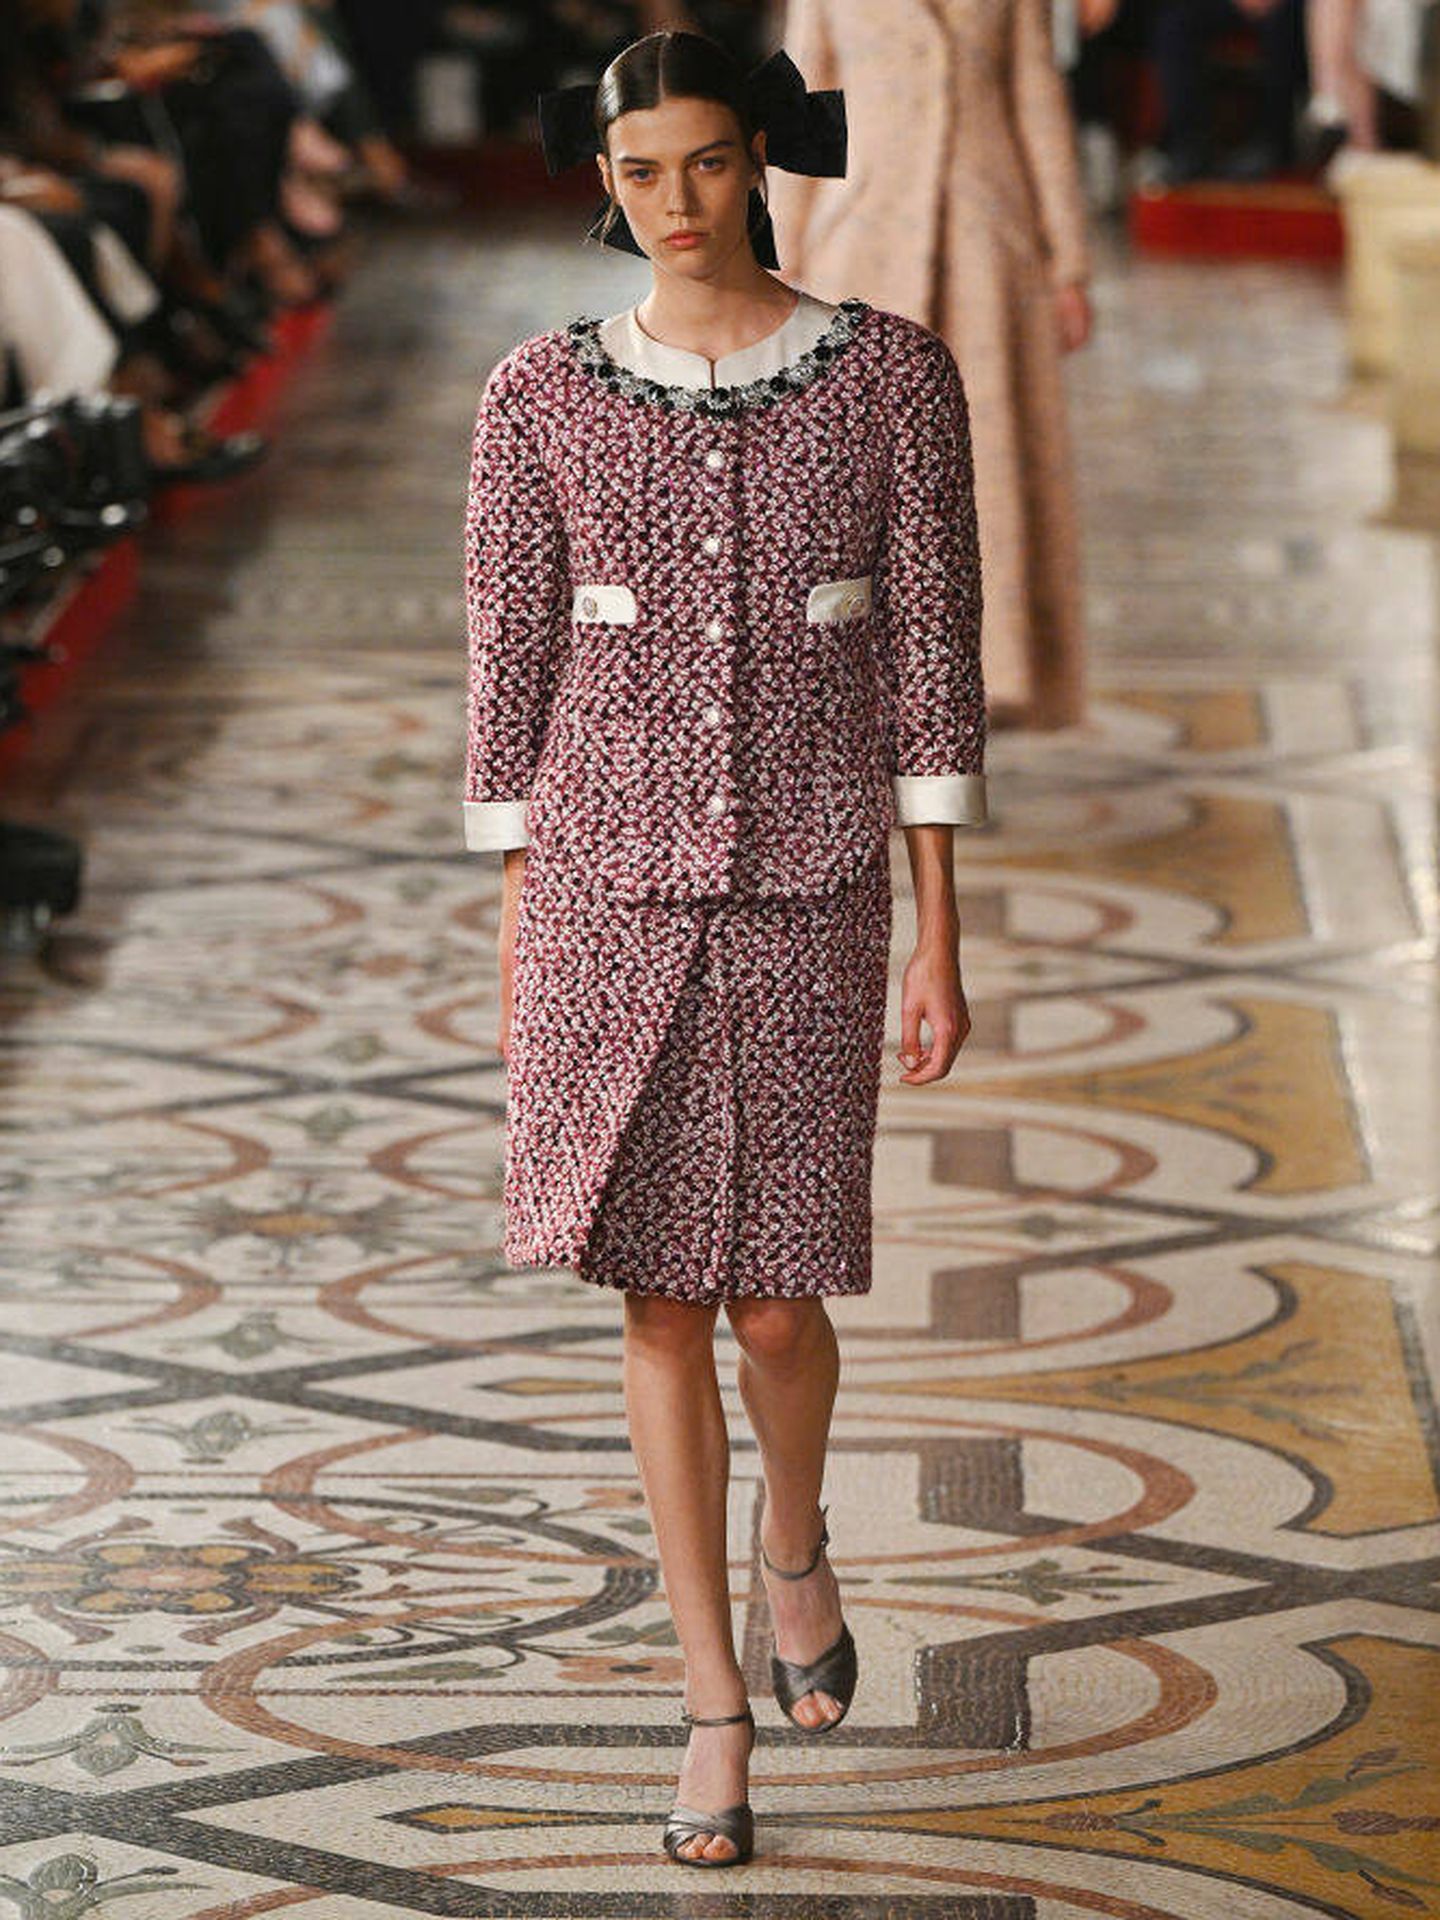 Chanel (Getty Images)